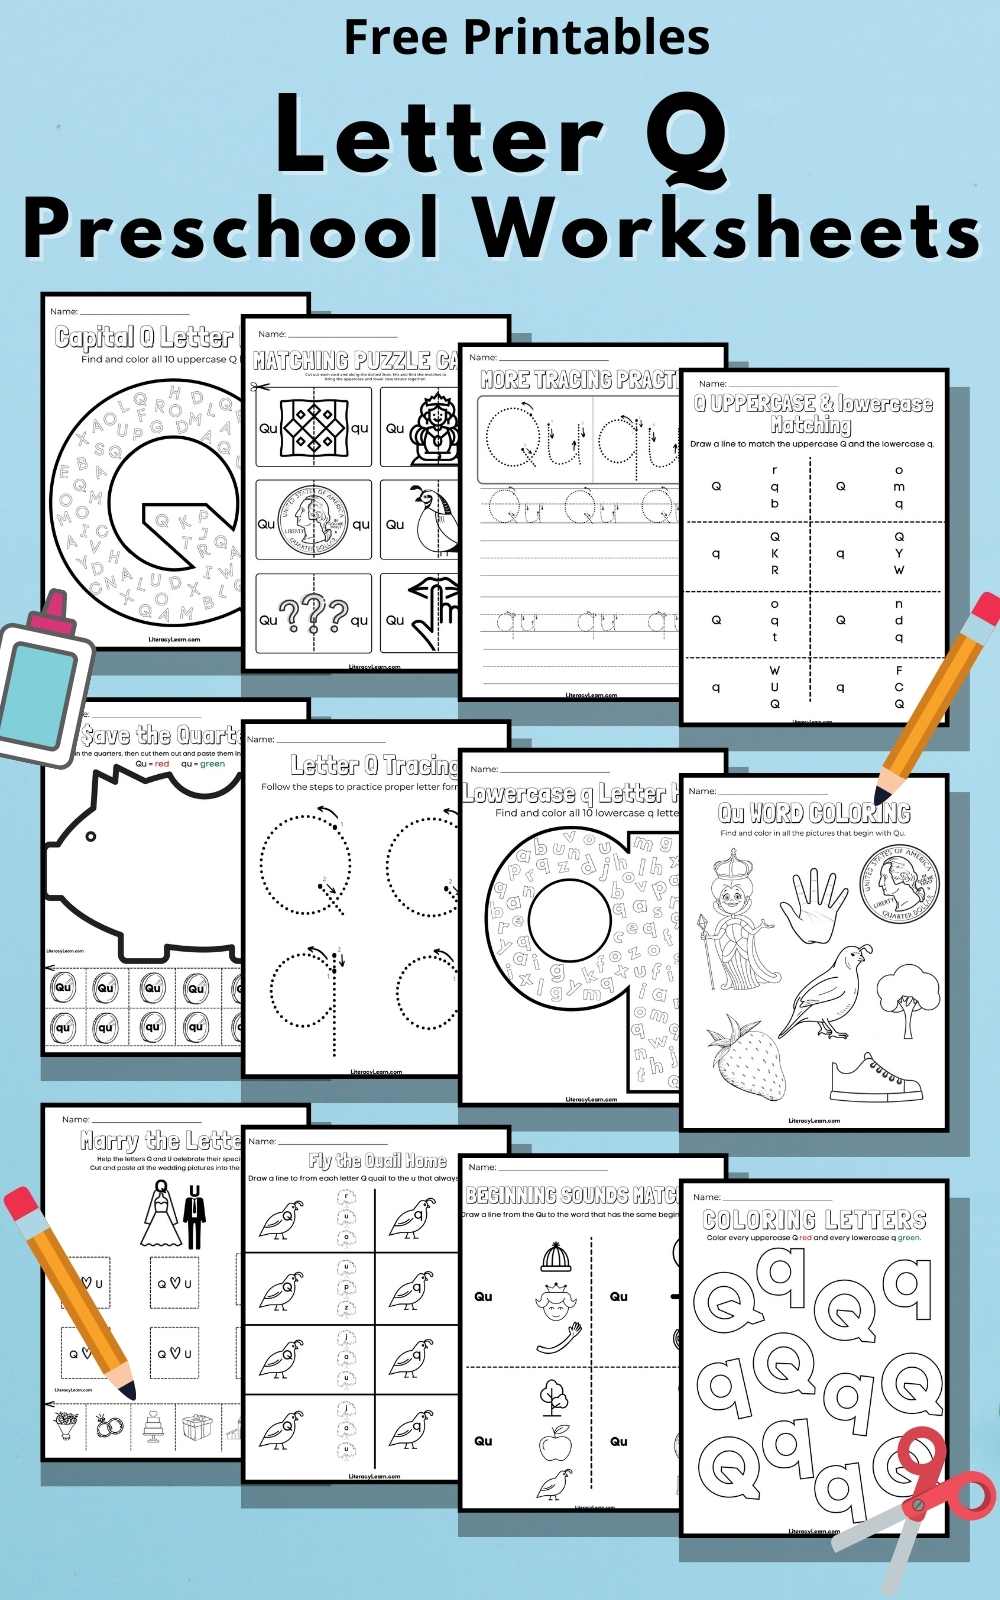 find-and-write-qu-words-phonics-worksheets-teacher-made-qu-digraph